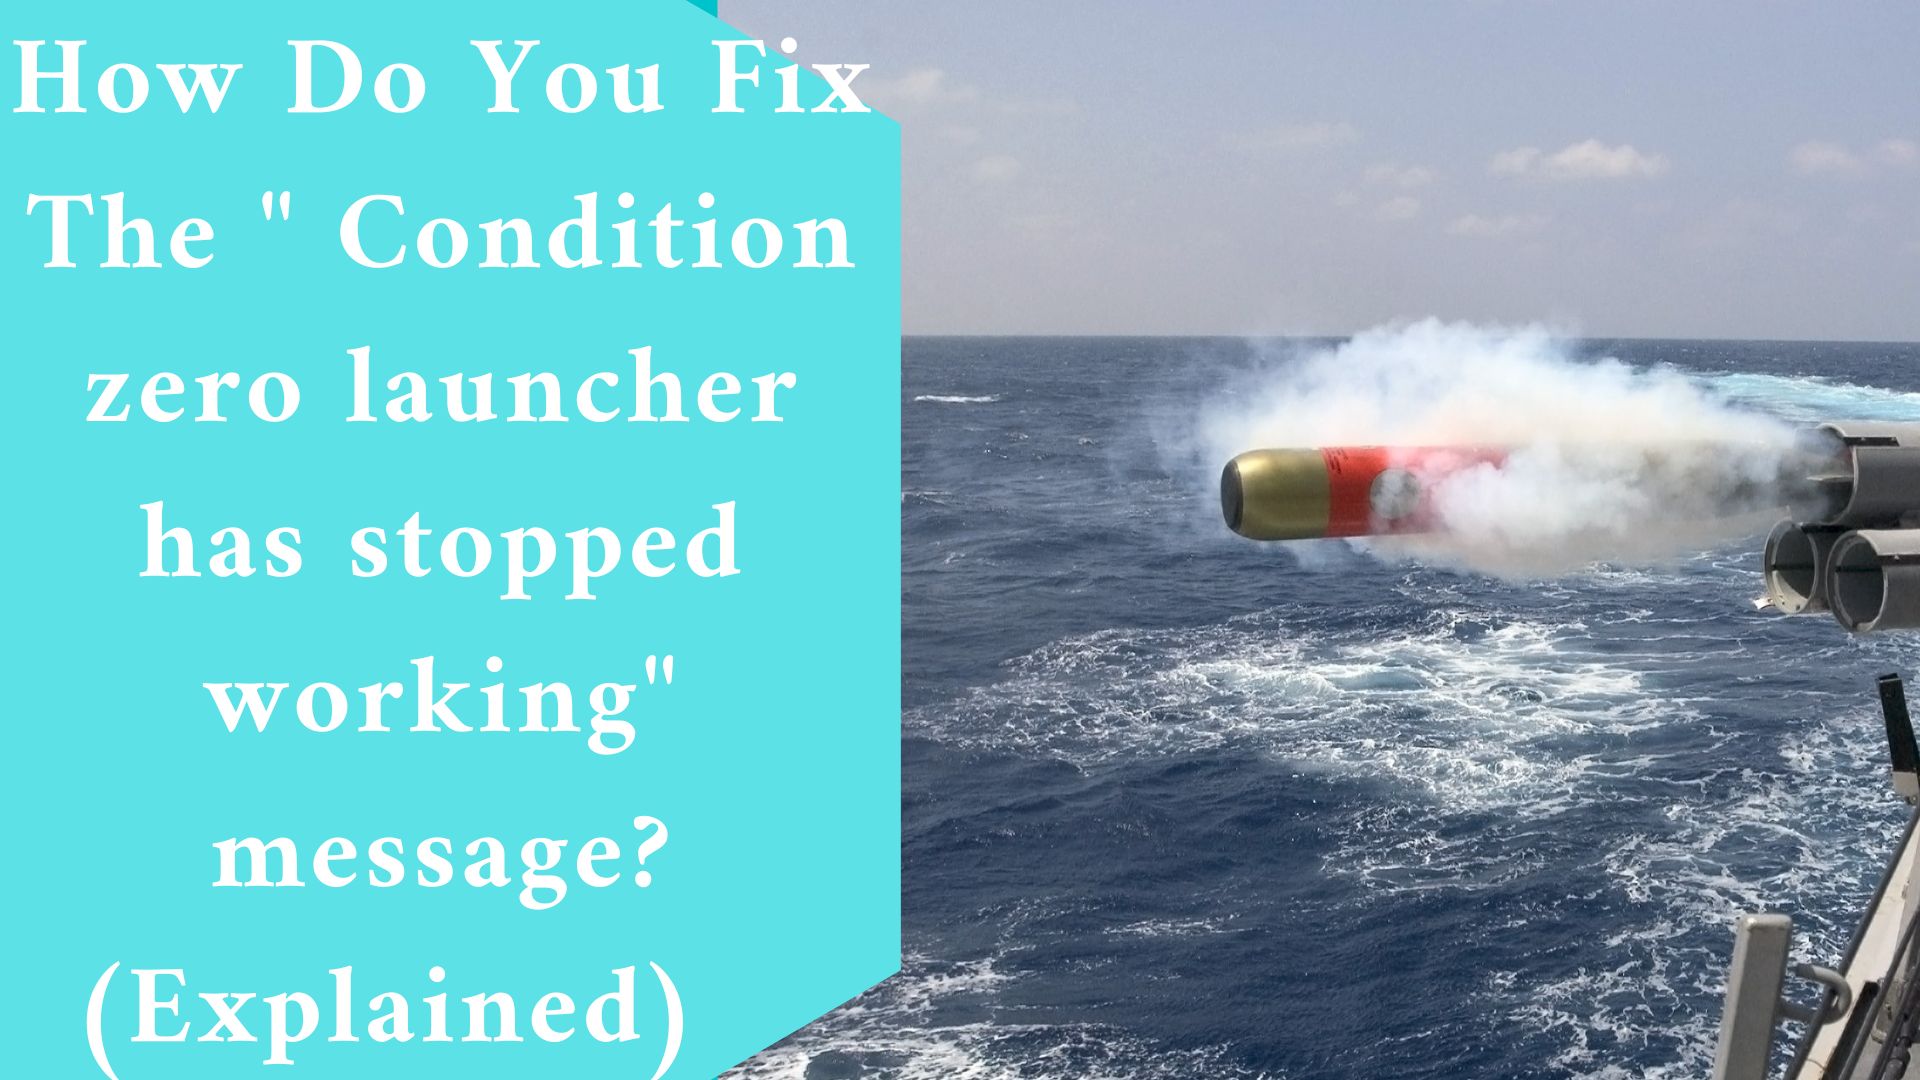 How Do You Fix The " Condition zero launcher has stopped working "} message? (Explained)